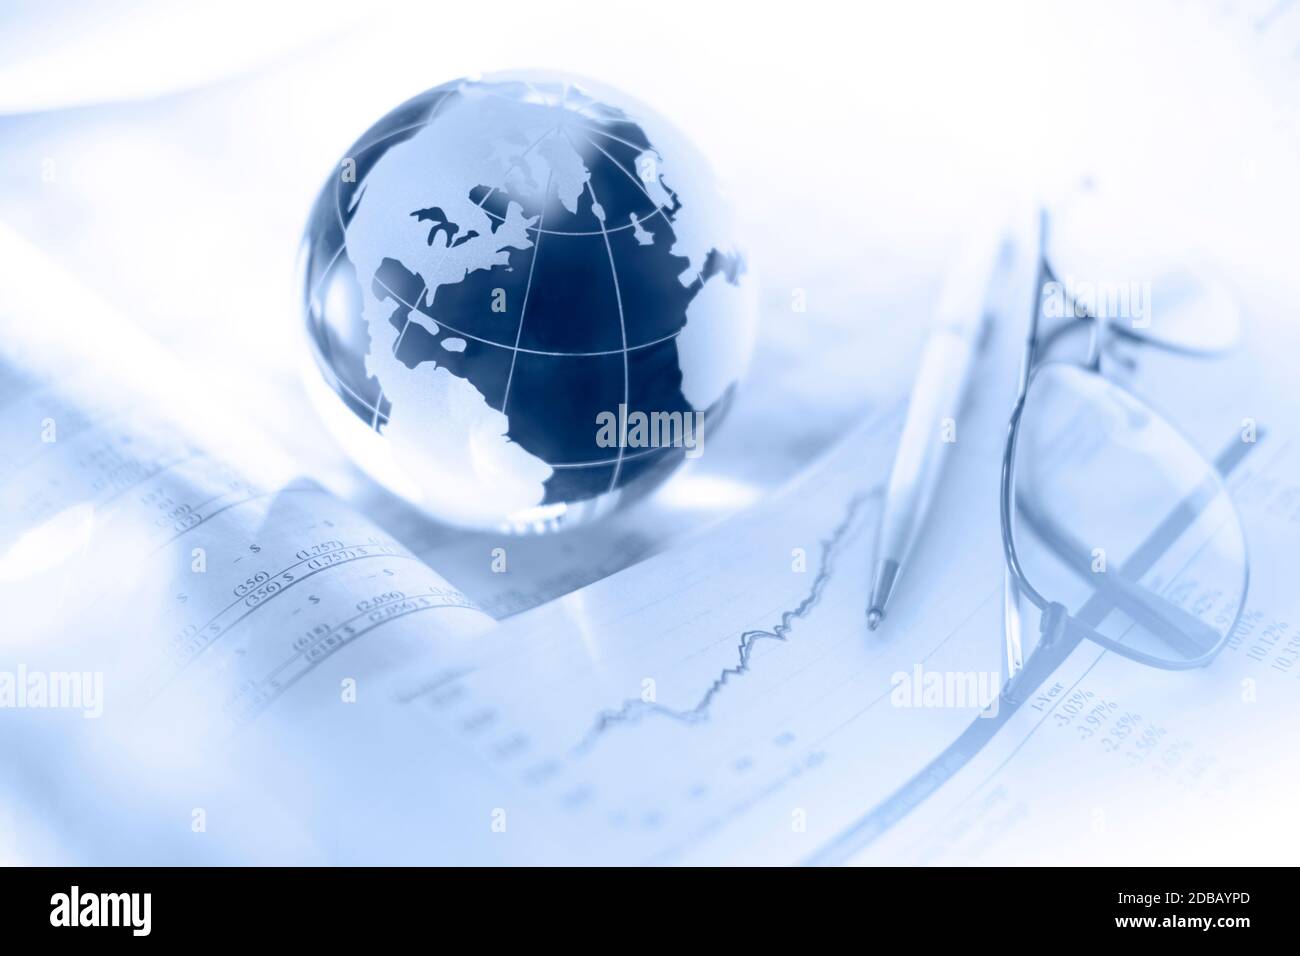 Glass globe with pen and glasses on financial charts Stock Photo